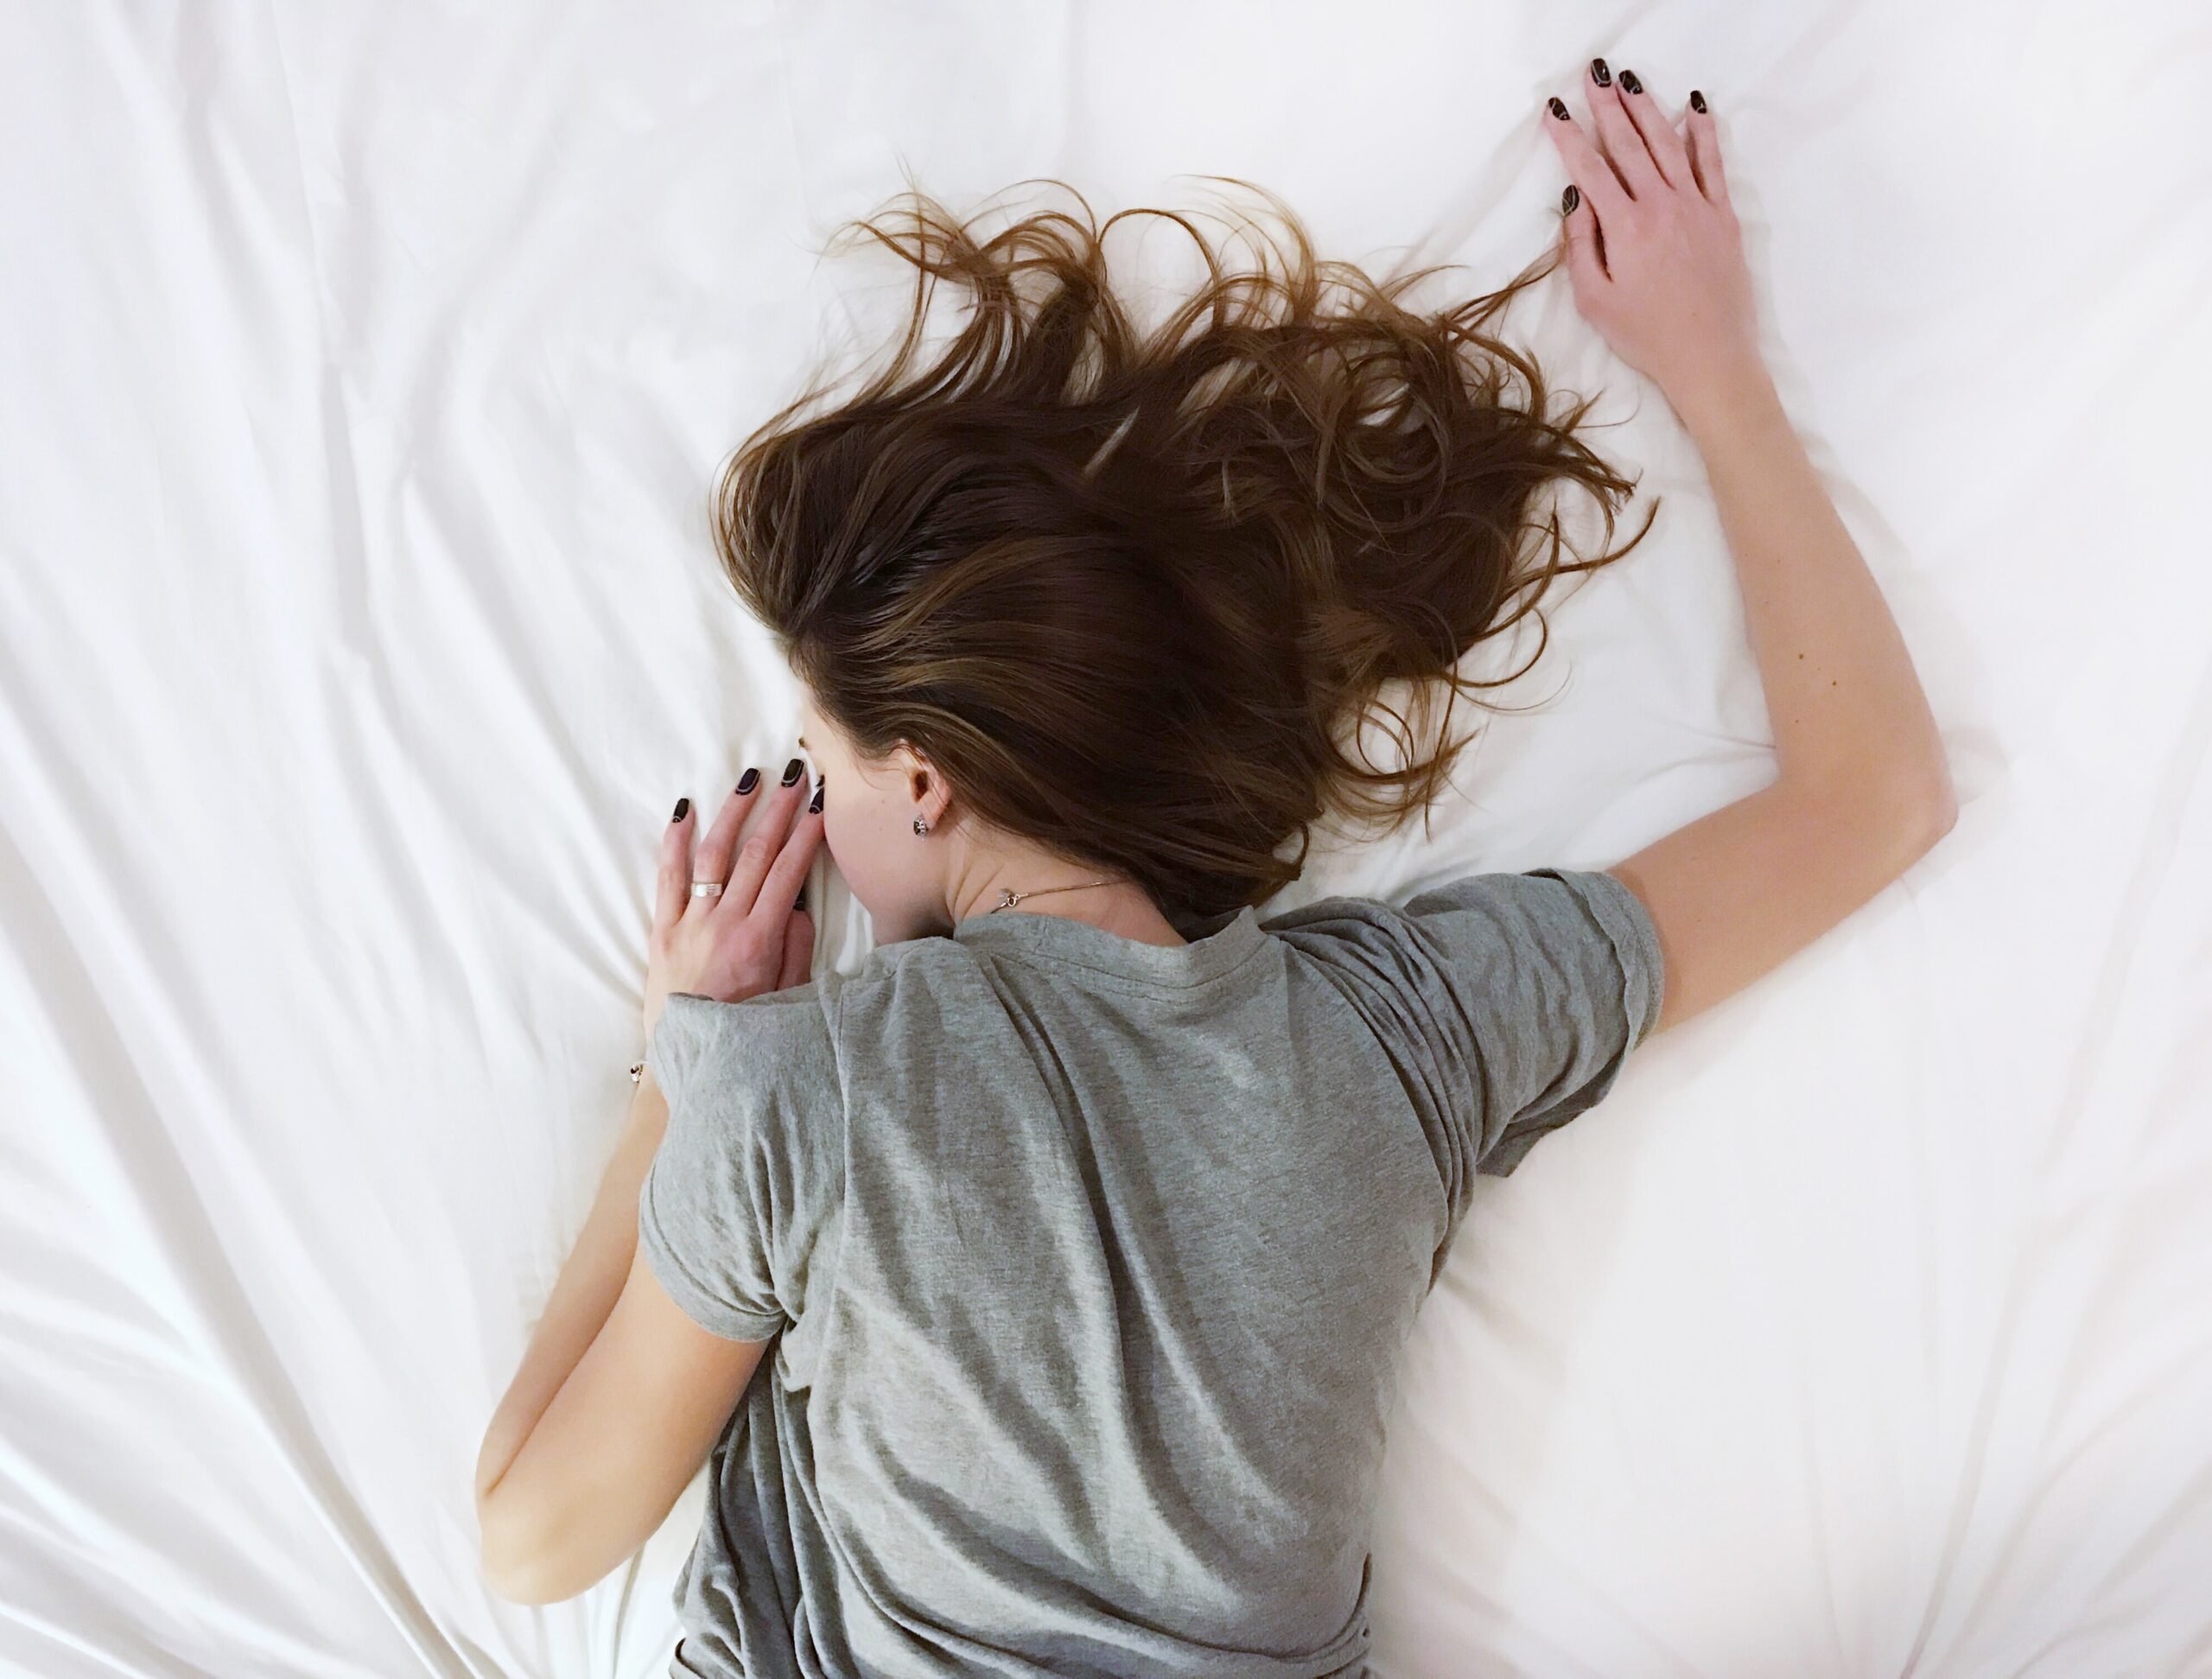 Sleep directly impacts your gut, metabolism, immune health, and more!